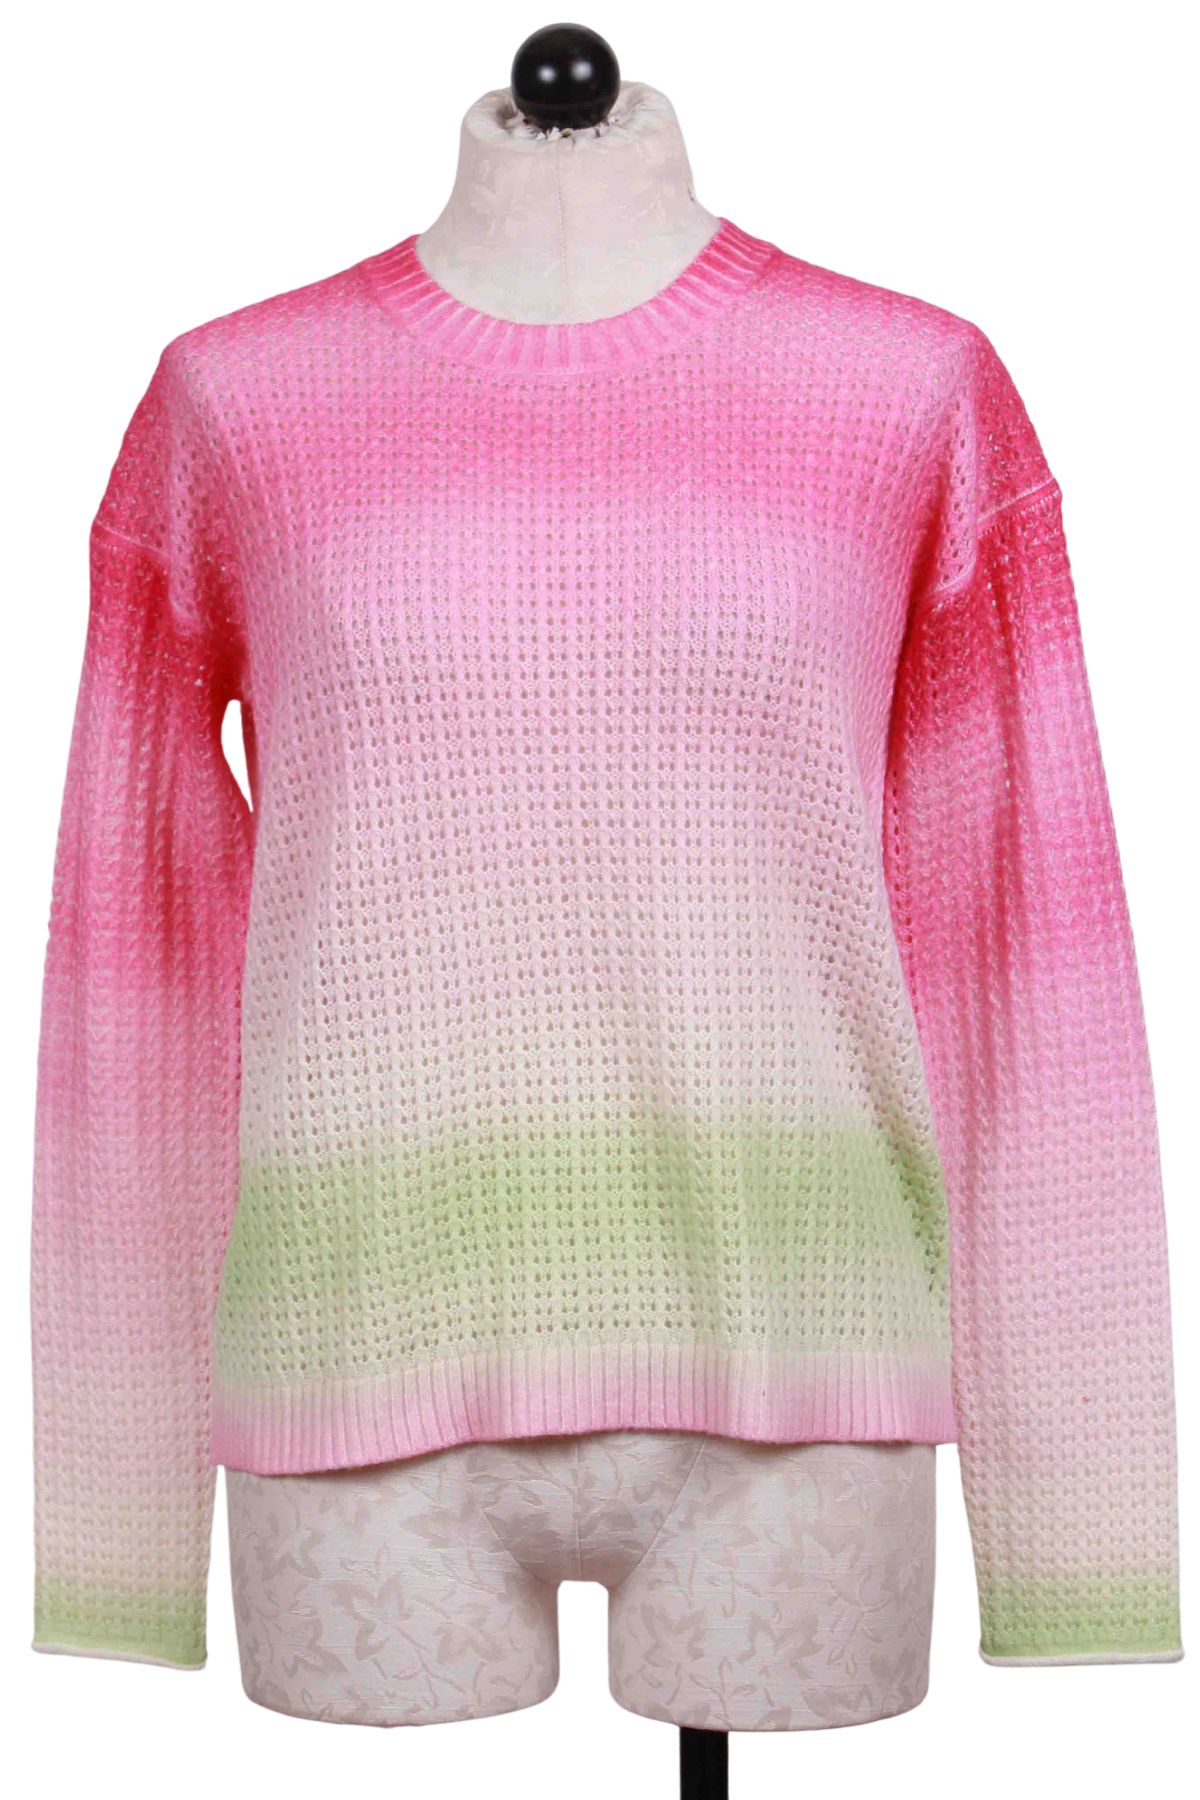 Bright Combo Color Dreamer Sweater by Lisa Todd